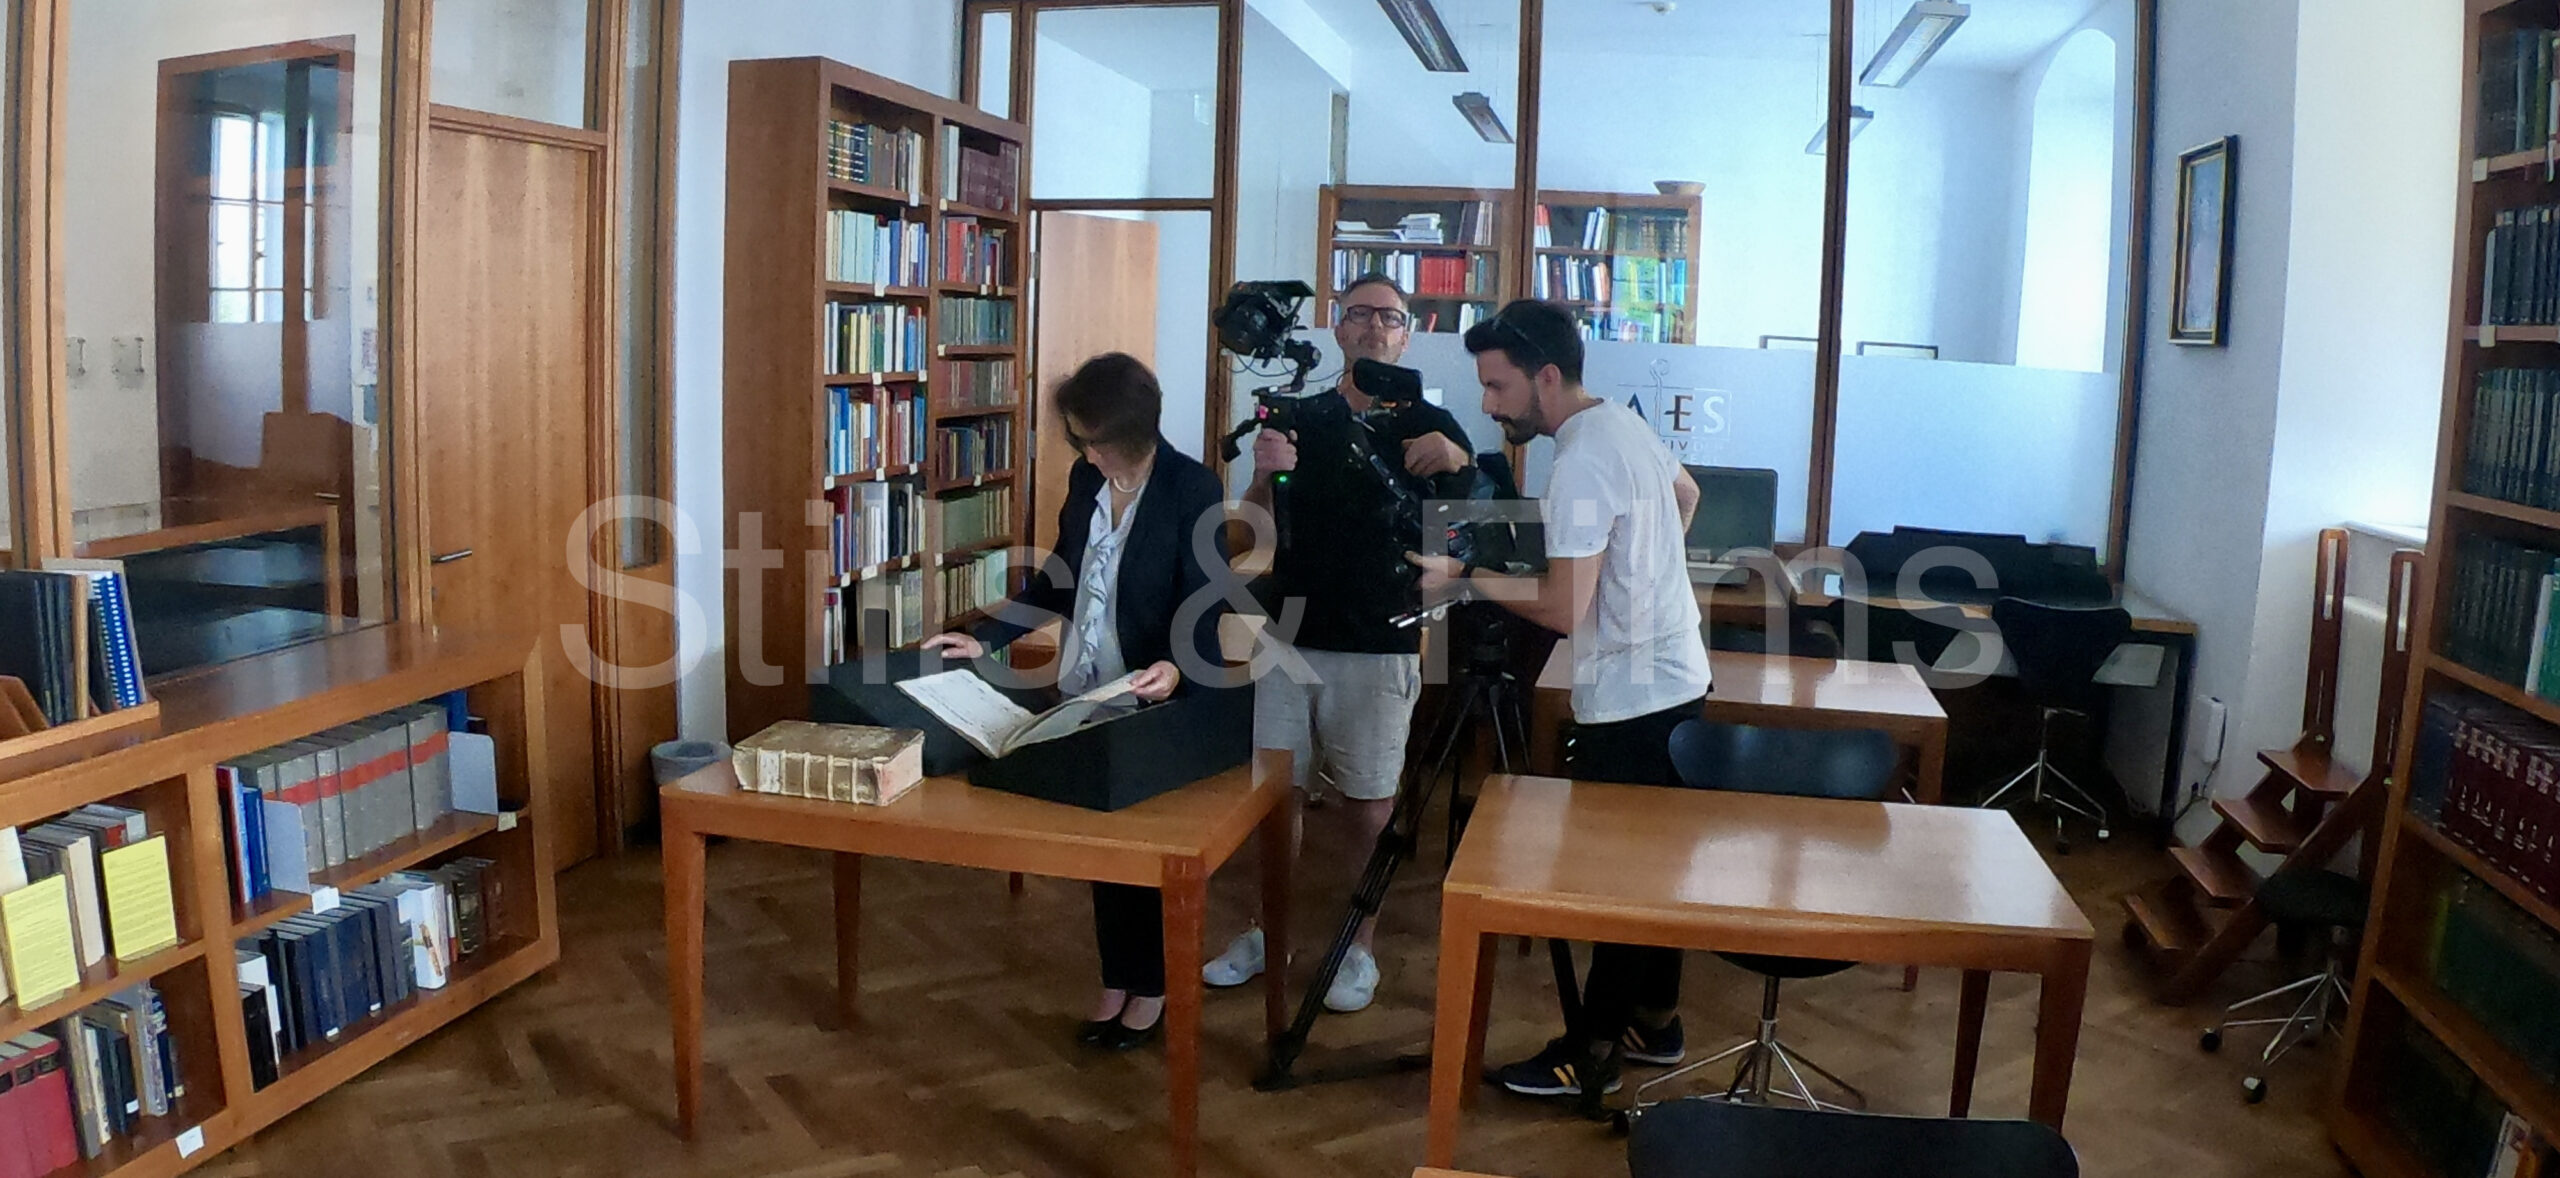 Filming in Salzburg archives for an Australian documentary production